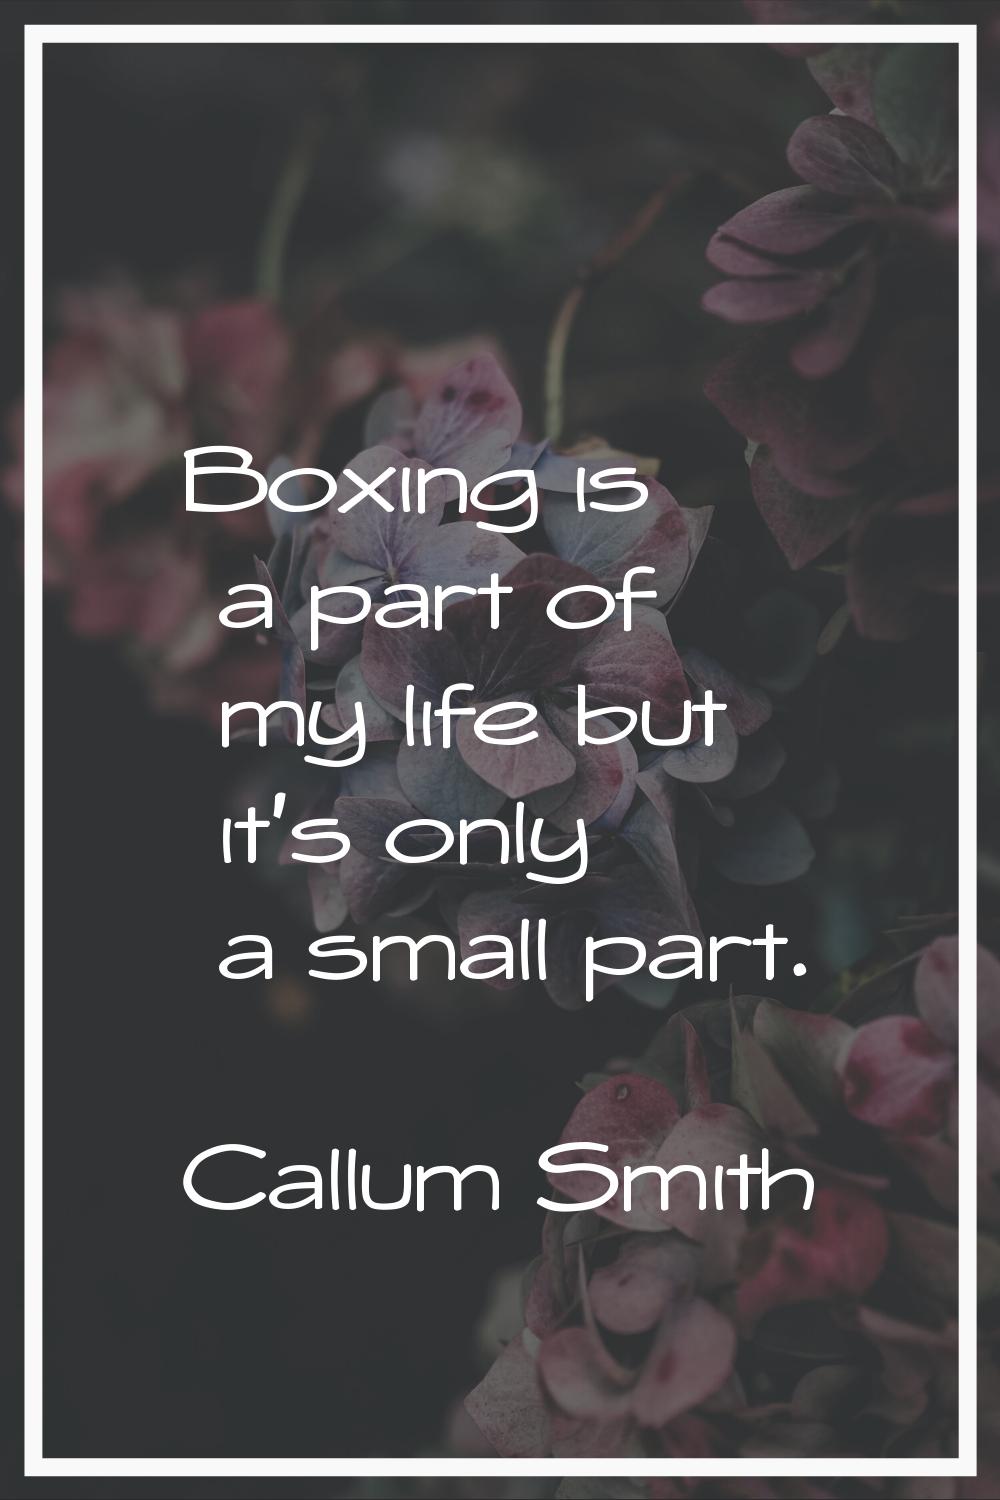 Boxing is a part of my life but it's only a small part.